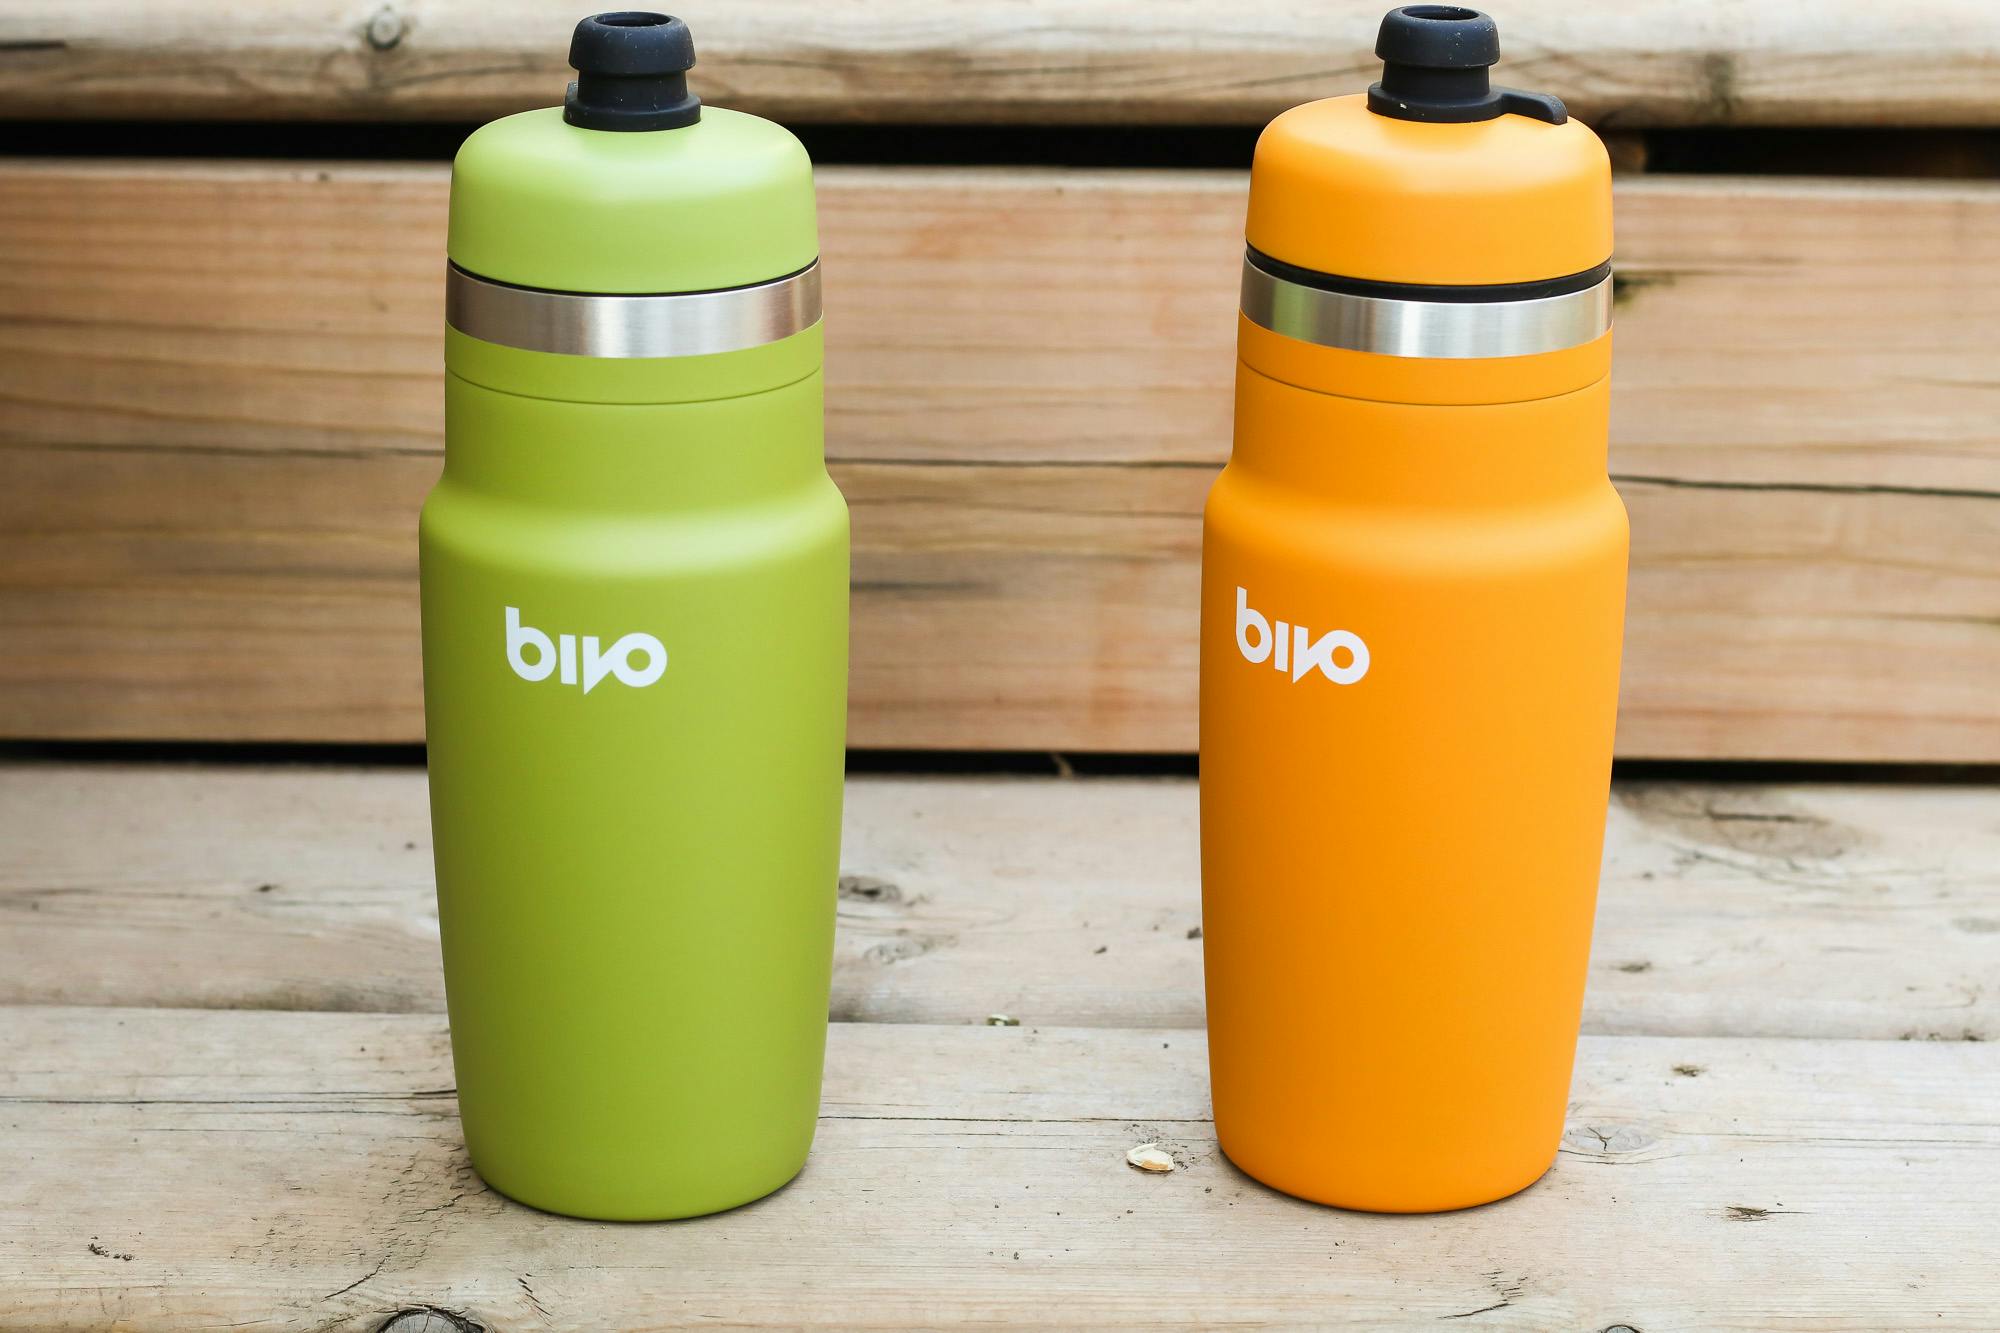 Bivo bottles are bright and cheerful.